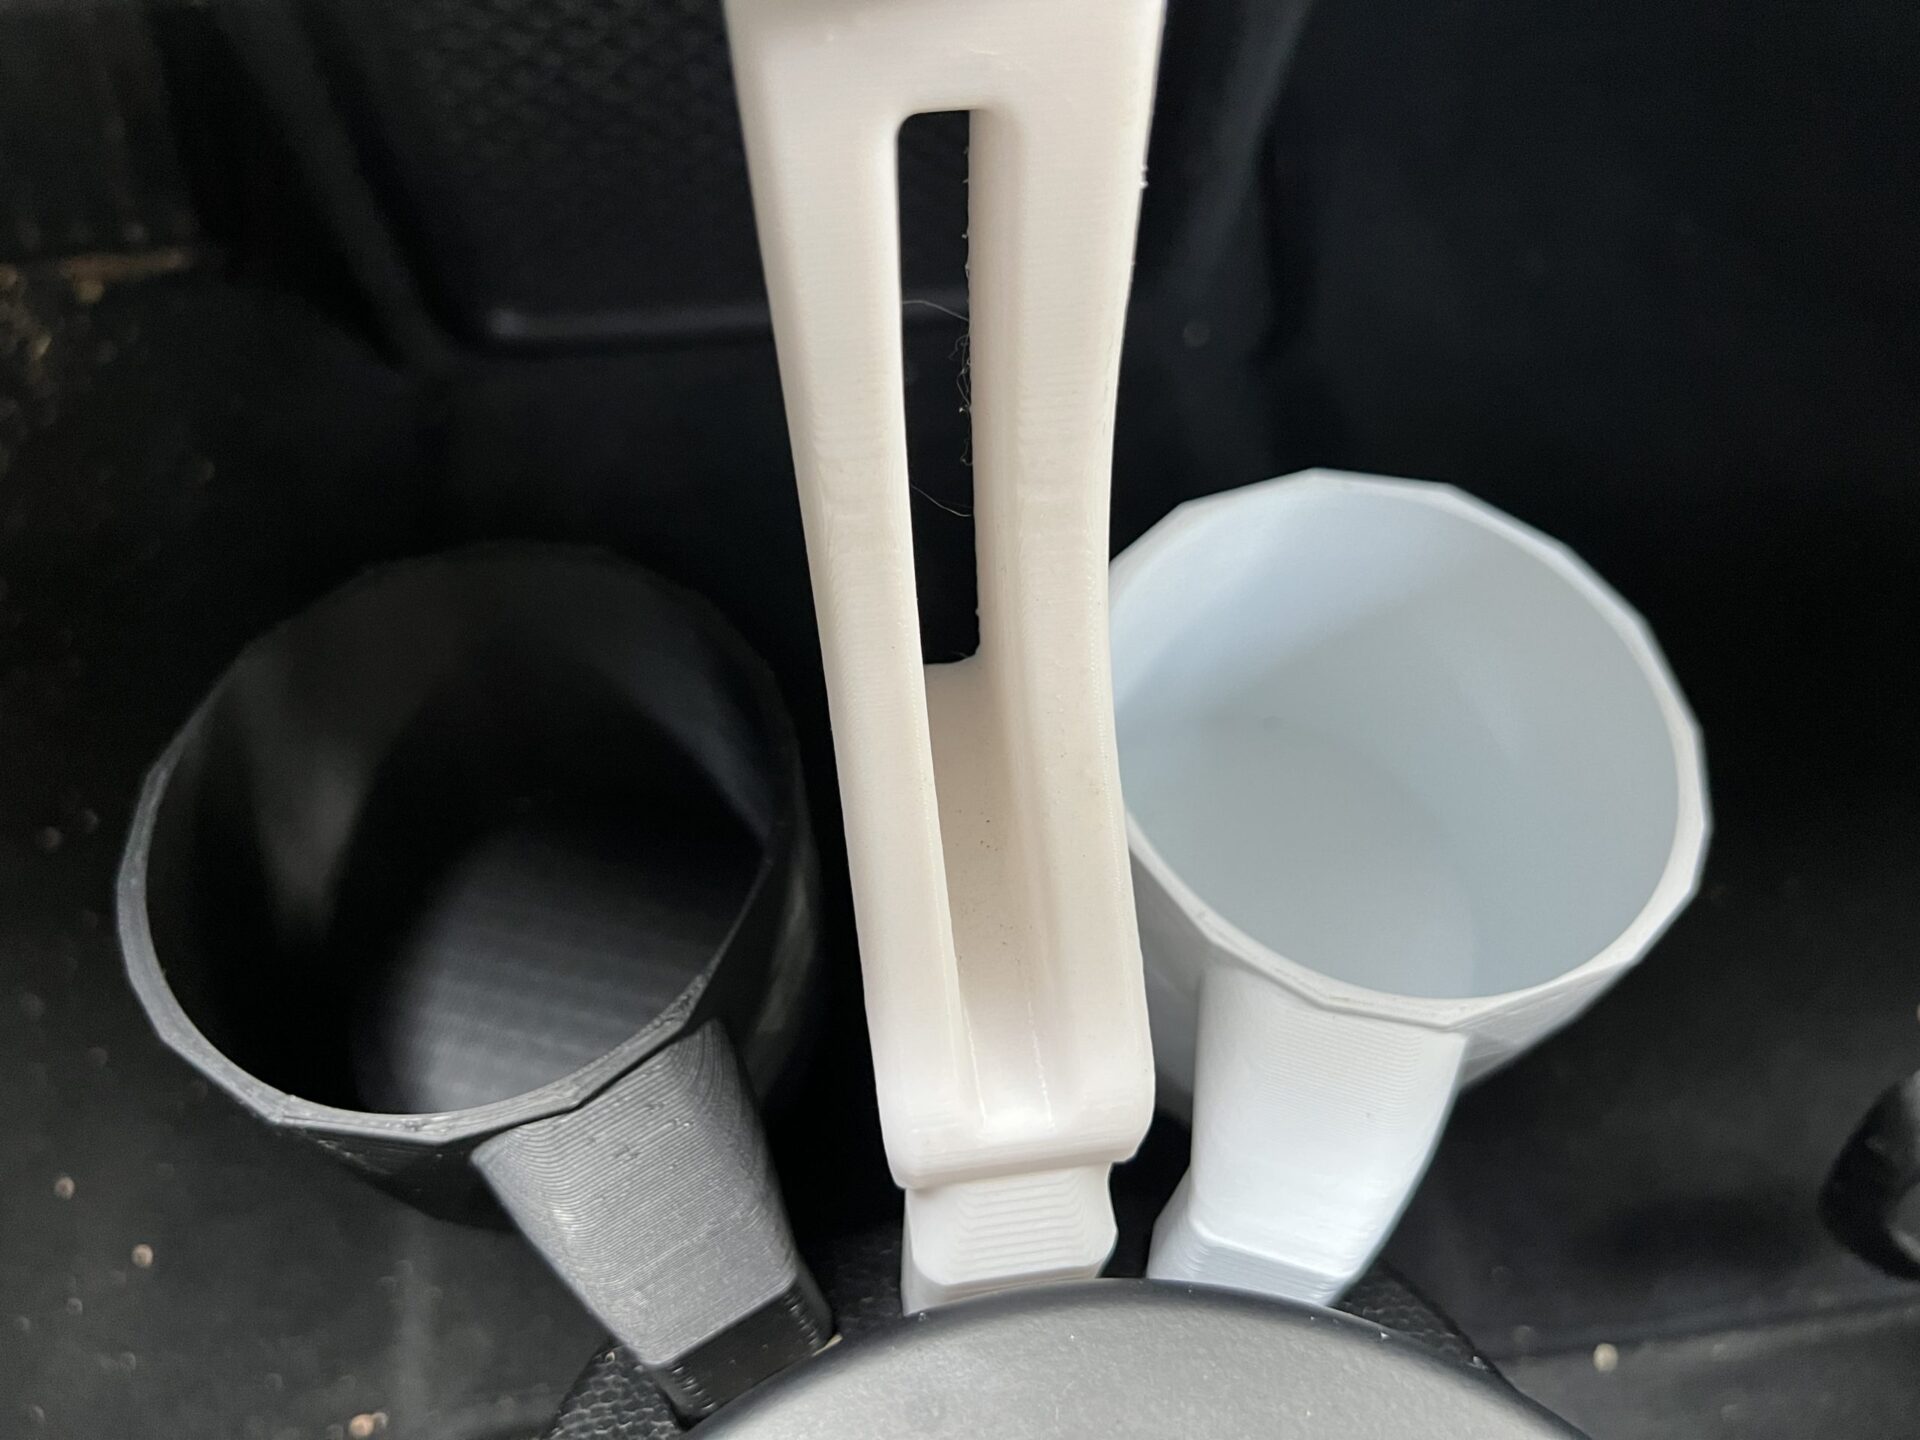 BMW i3 cup holders - 3D printed in ABS - LAVA LABS